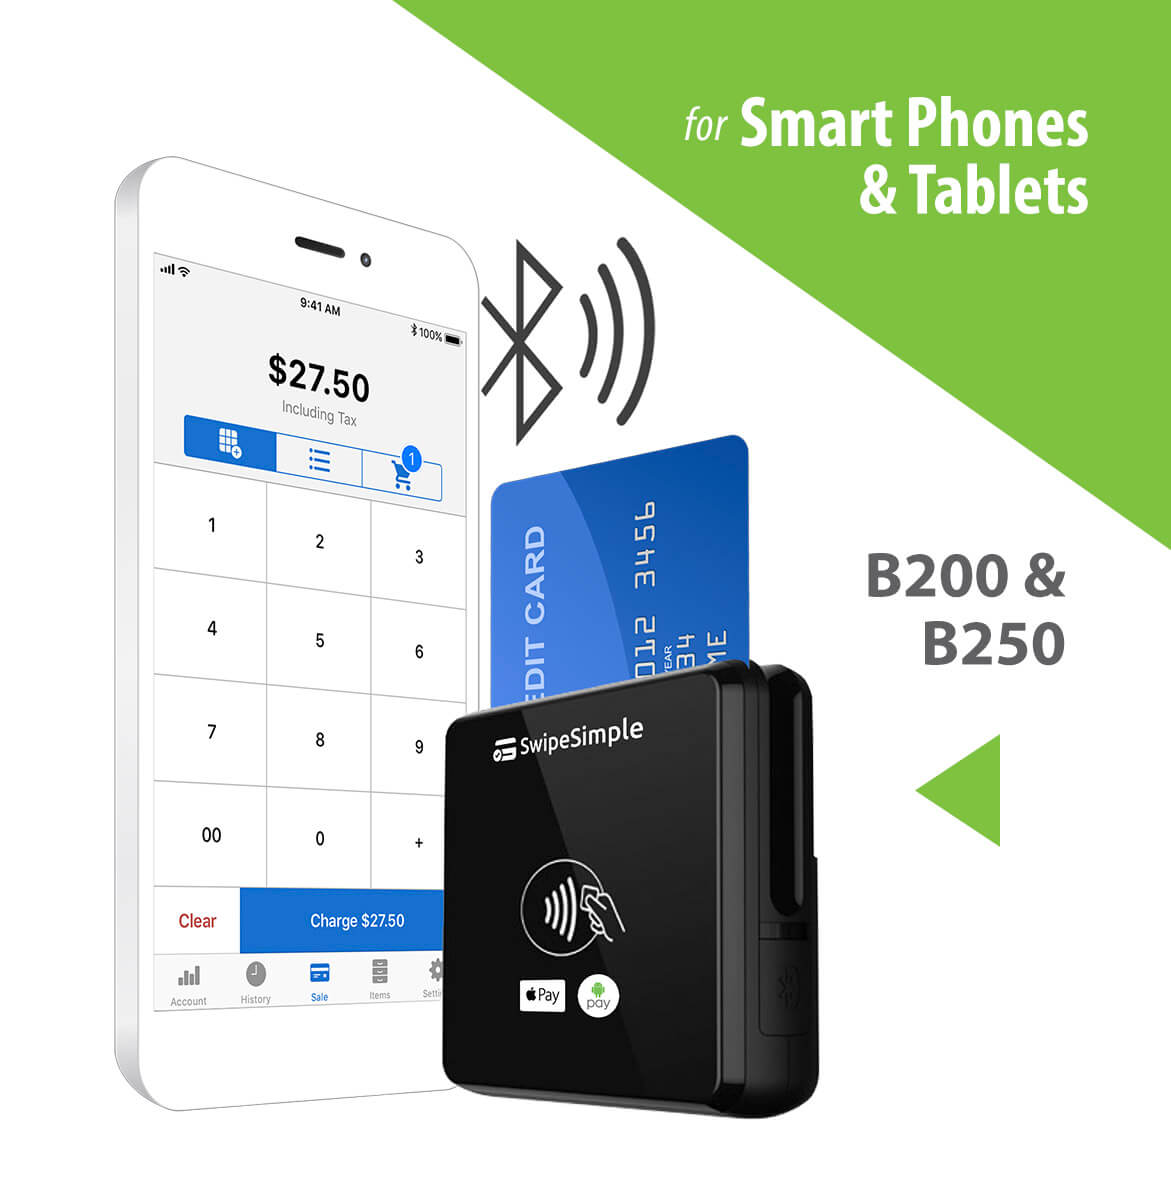 The B200 & B250 for smart phones & tablets